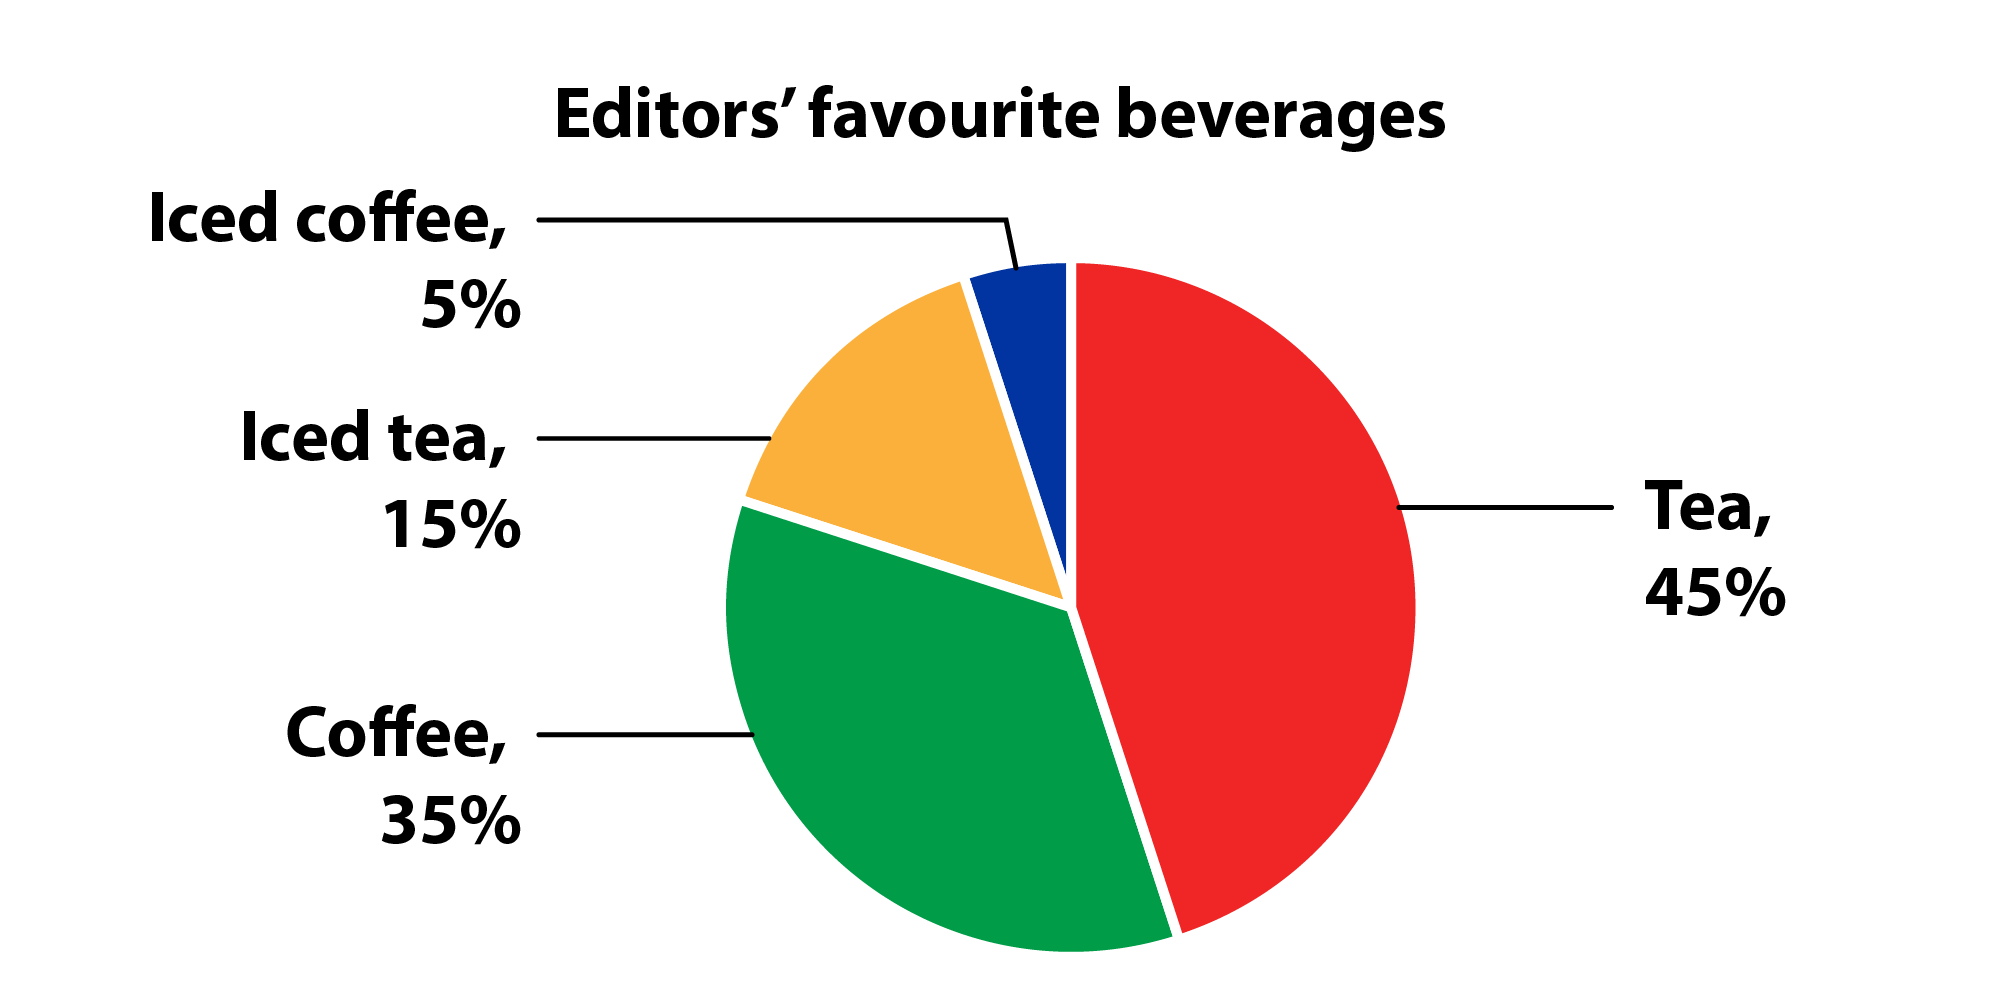 A pie chart with the title "Editors' favourite beverages," using red to represent tea, green to represent coffee, orange to represent iced tea, and blue to represent iced coffee. Outlines have been added to the slices to separate them, and the slices have been labelled: Tea, 45%; Coffee, 35%; Iced tea, 15%; Iced coffee, 5%.